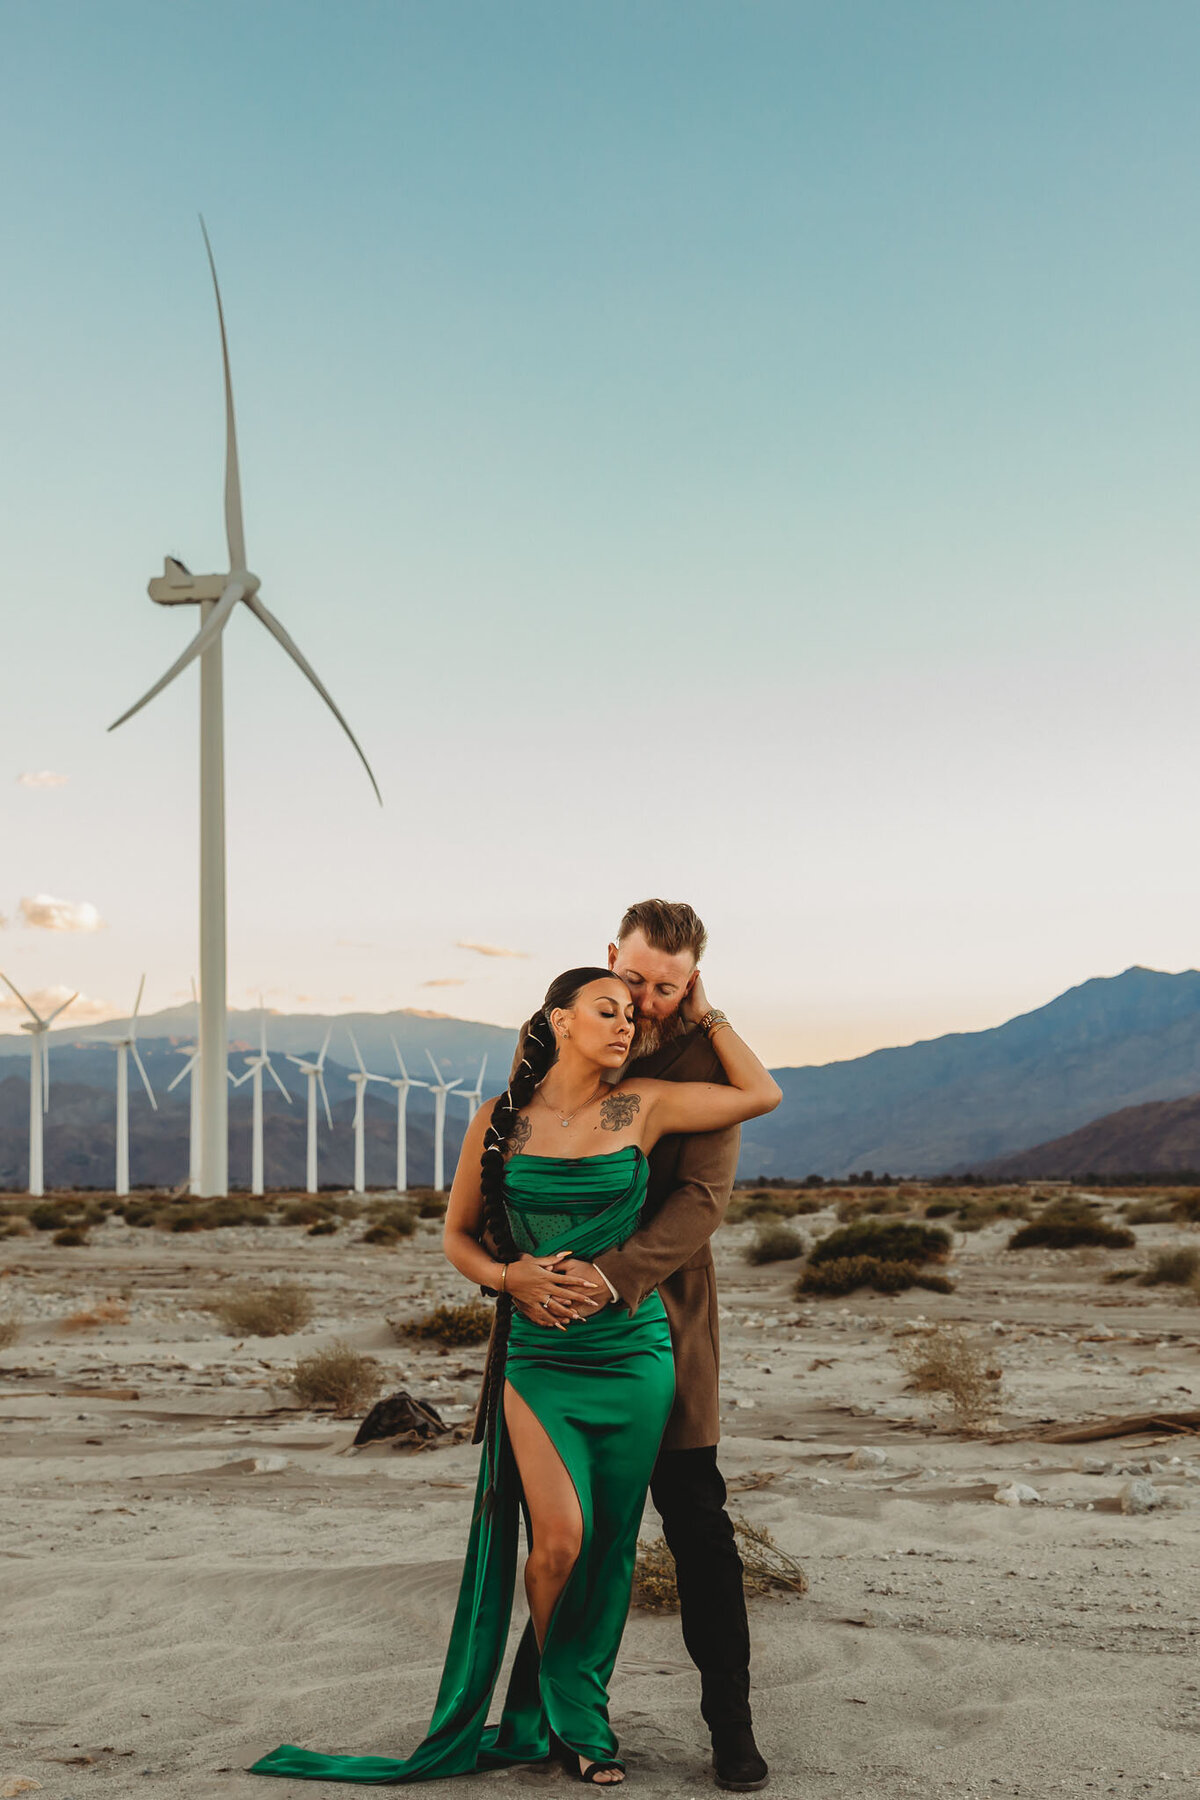 melissa-fe-chapman-photography-Palm-Springs-Windmills-Engagement-Session 1-11